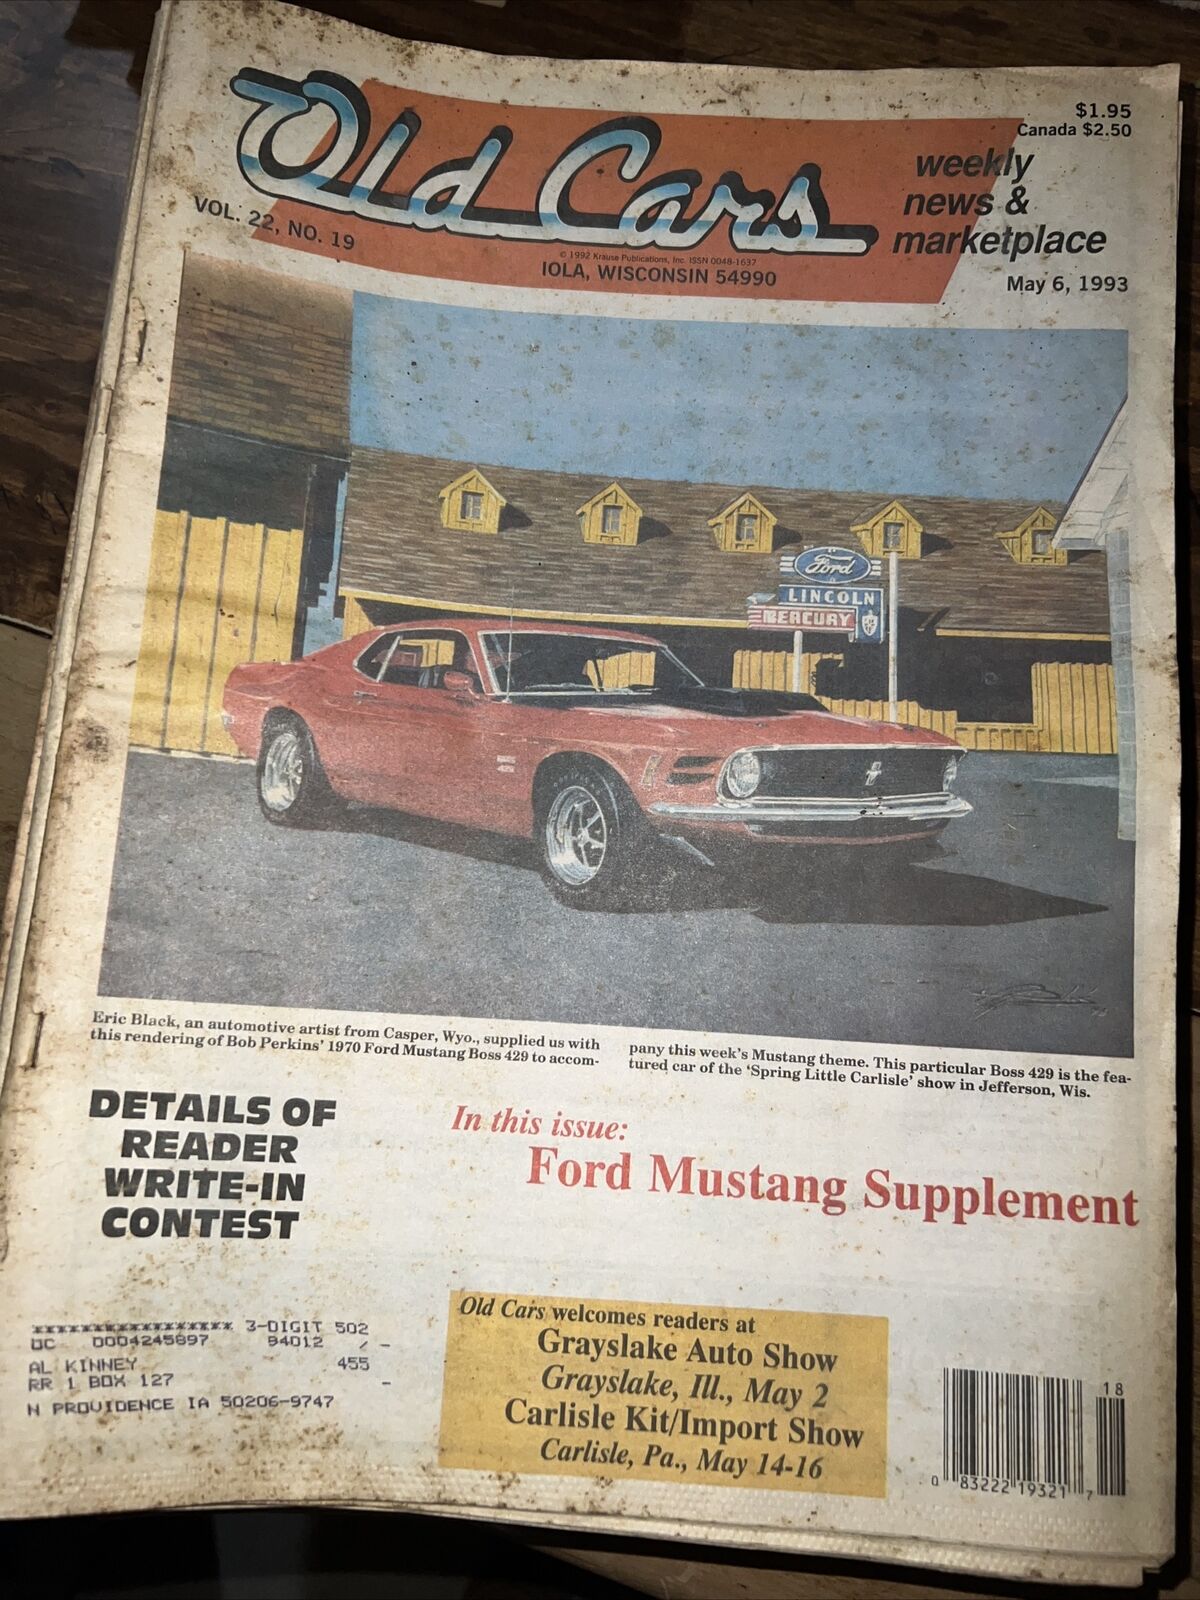 OLD CARS WEEKLY NEWSPAPER | 31 Copies Of 52 year1993 IN GOOD CONDITION-